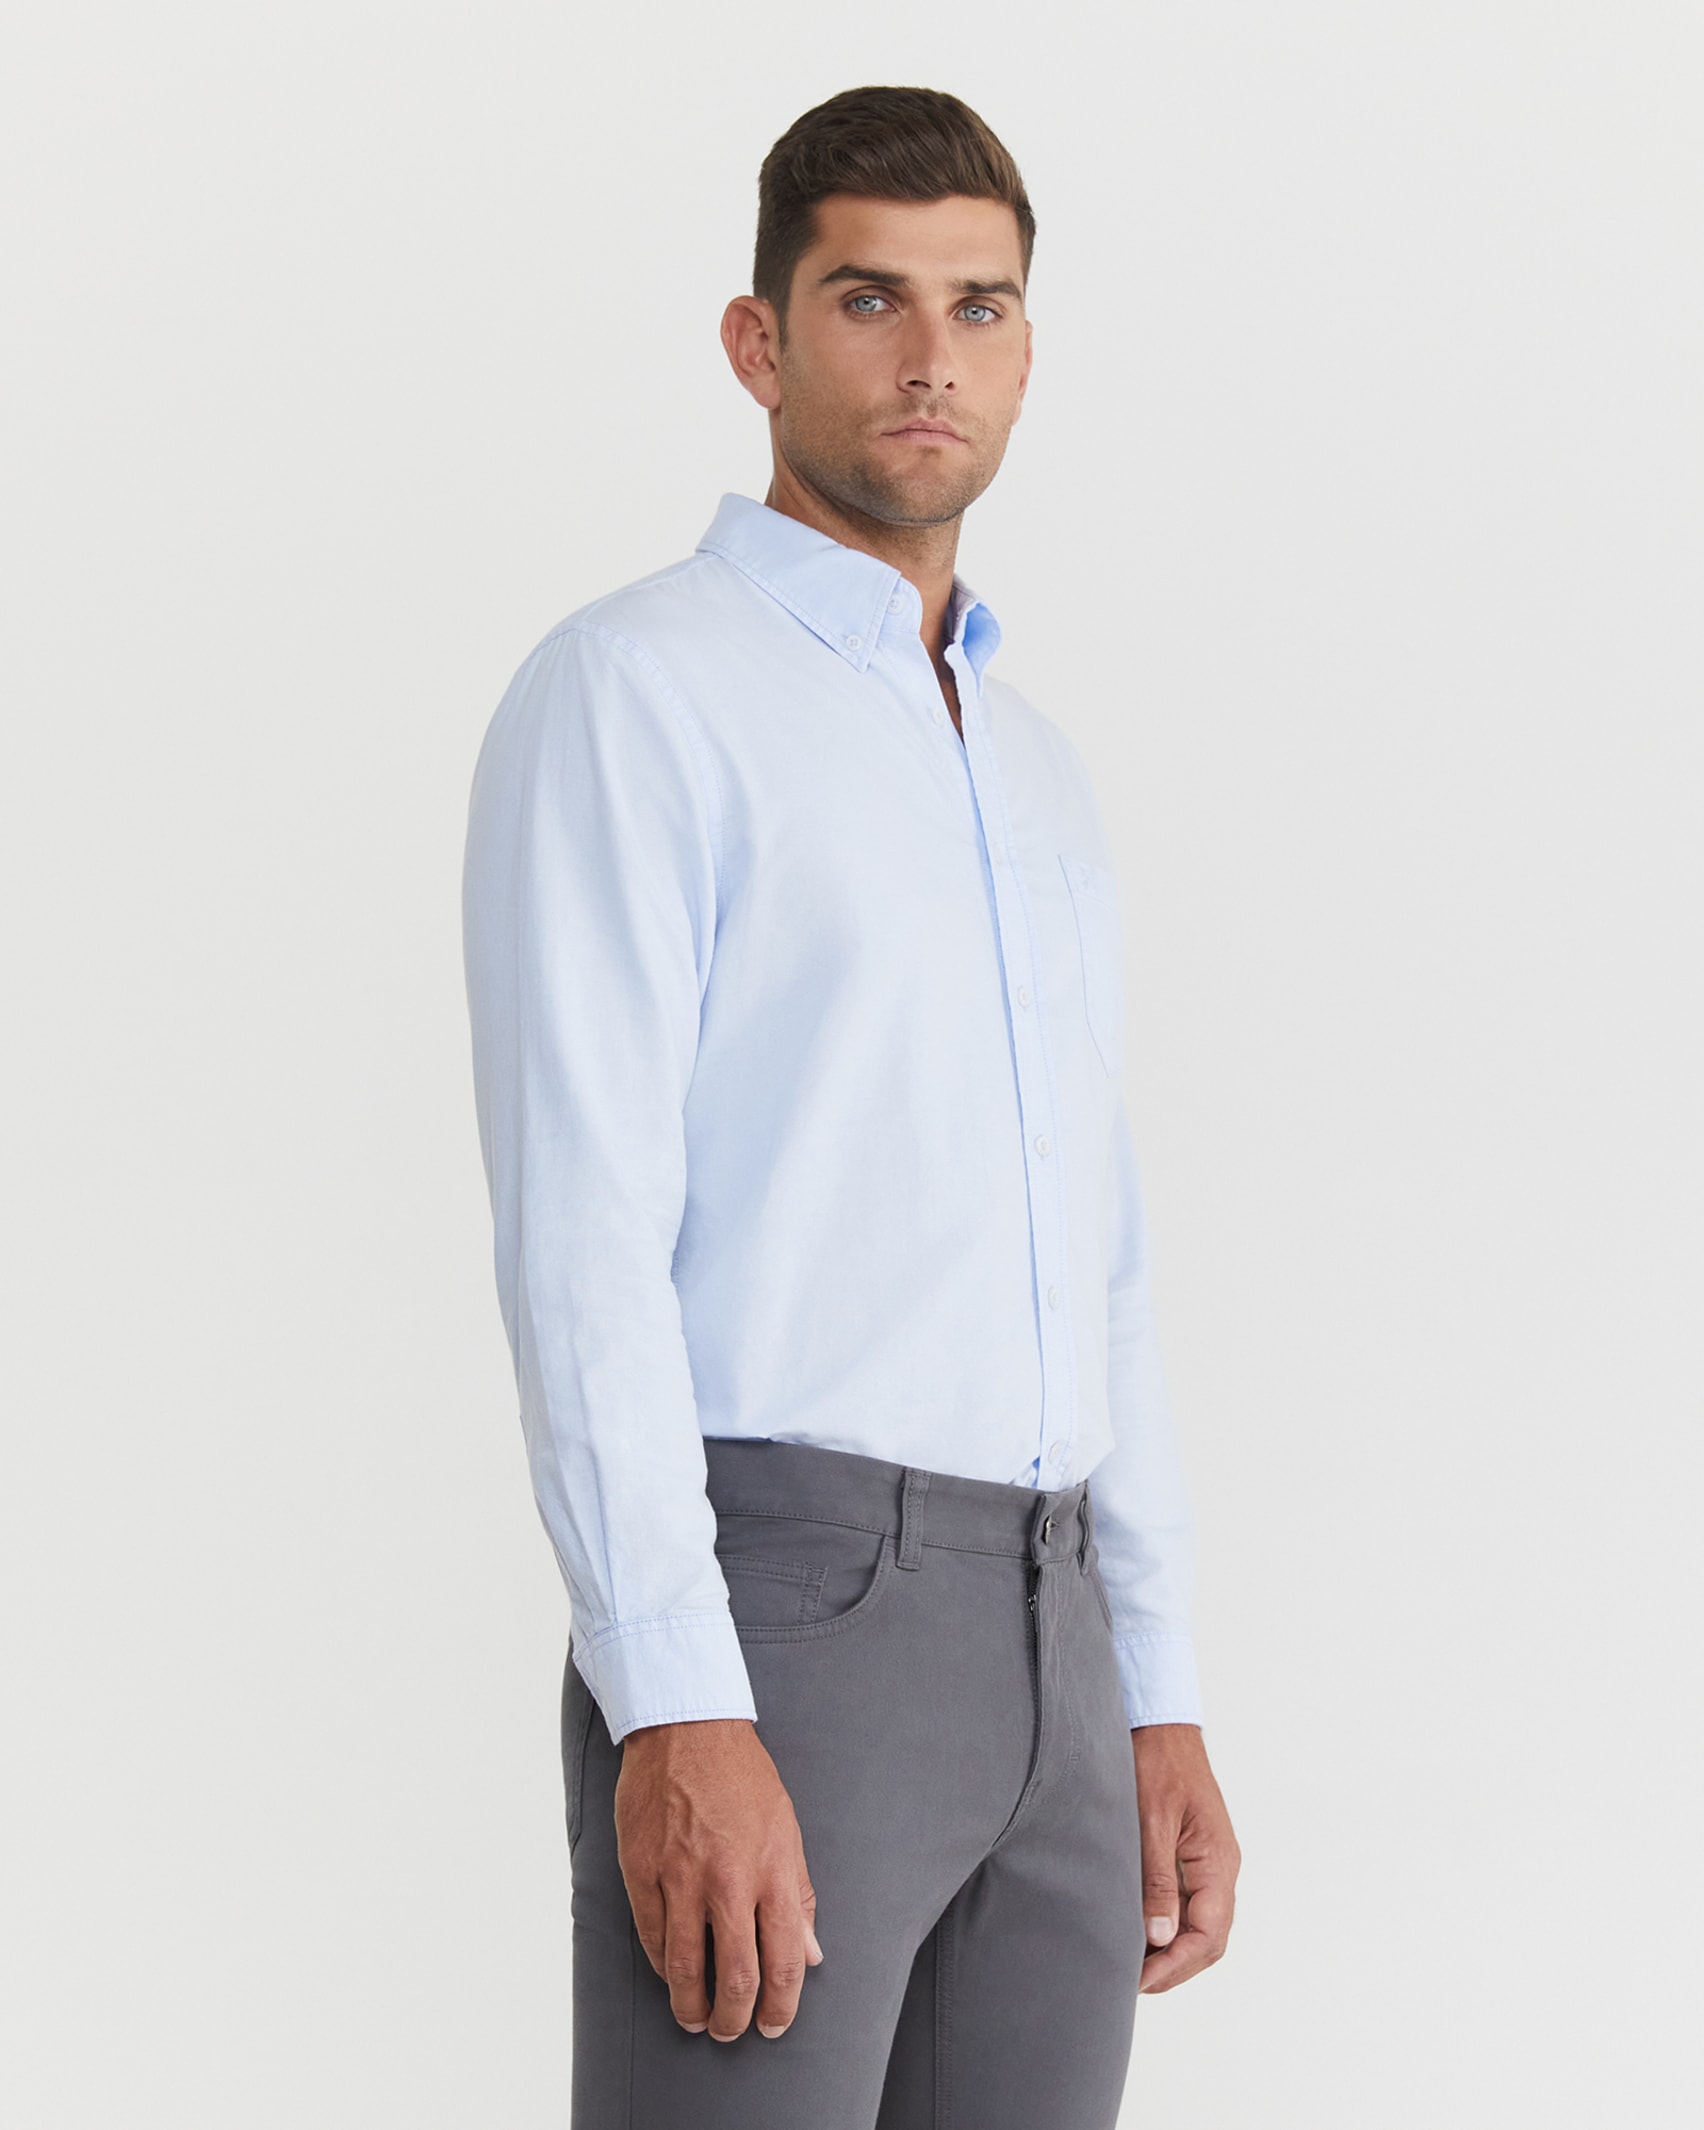 Oxford Long Sleeve Shirt in FROST BLUE